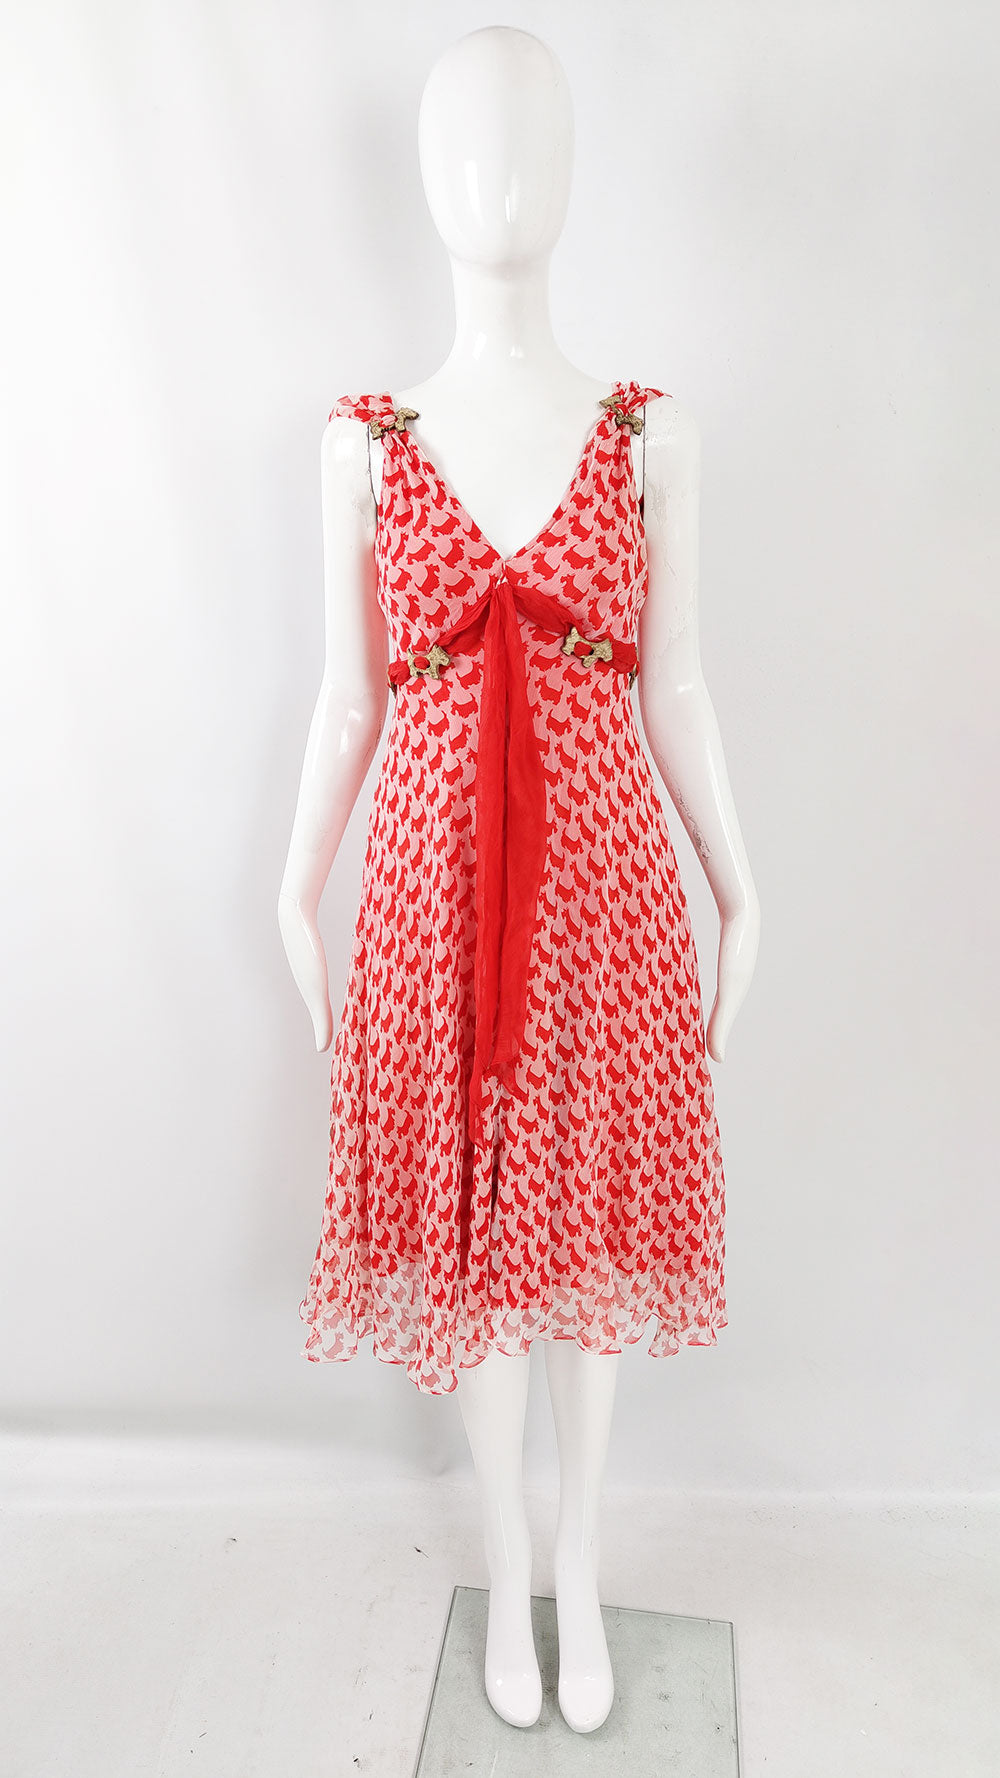 A mannequin wearing a sleeveless vintage Ronit Zilkha dress made from a pink and red silk chiffon with Scottie dogs printed all over.